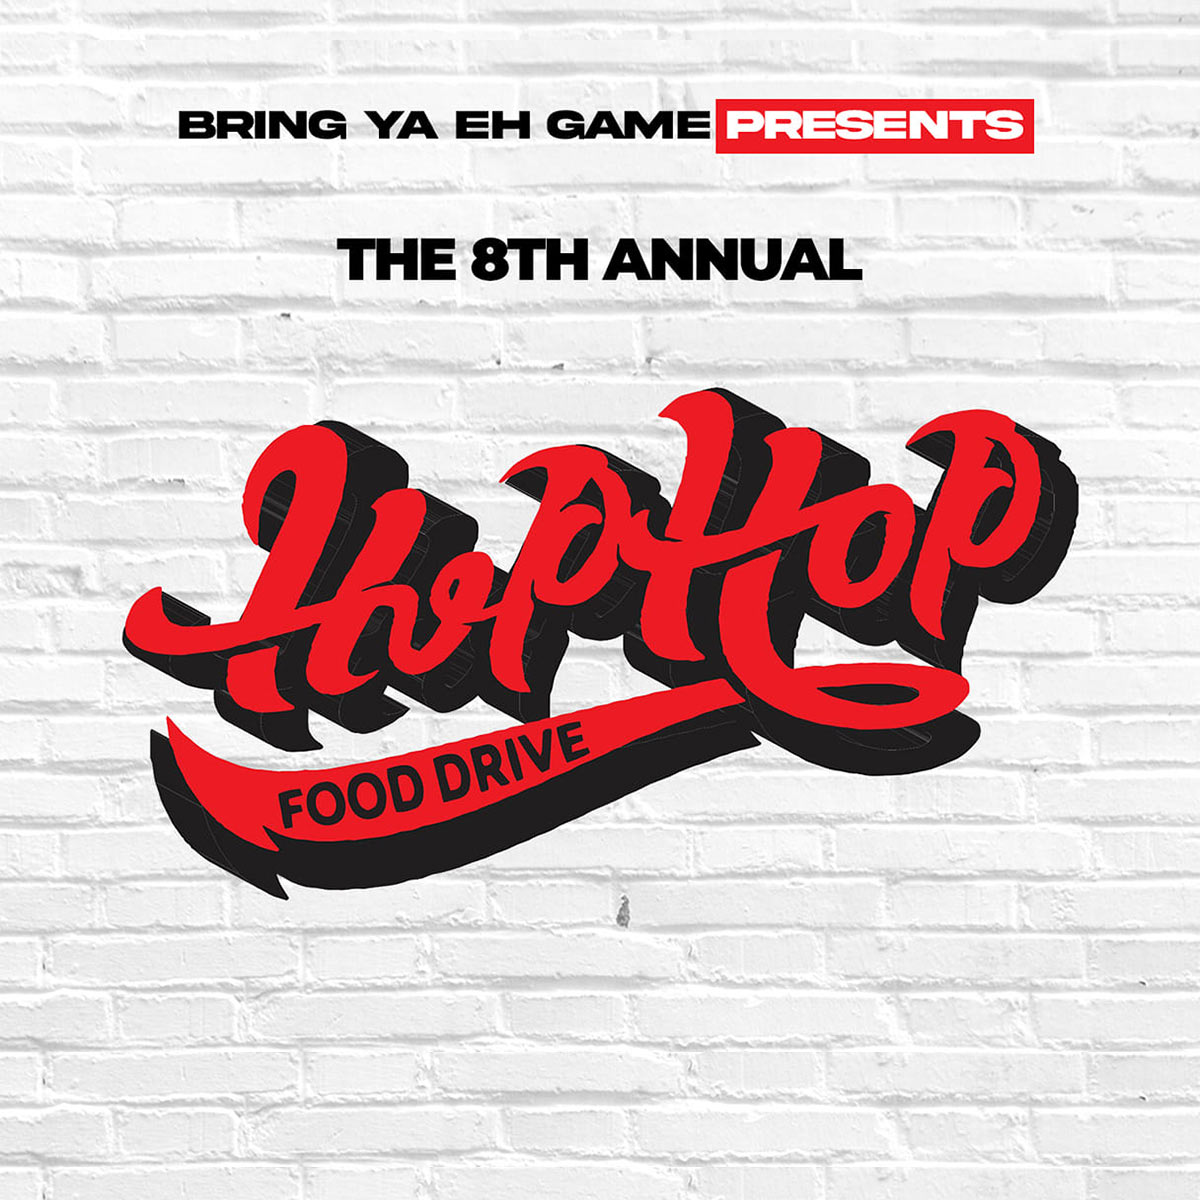 Promotional poster for the Hip Hop Food Drive